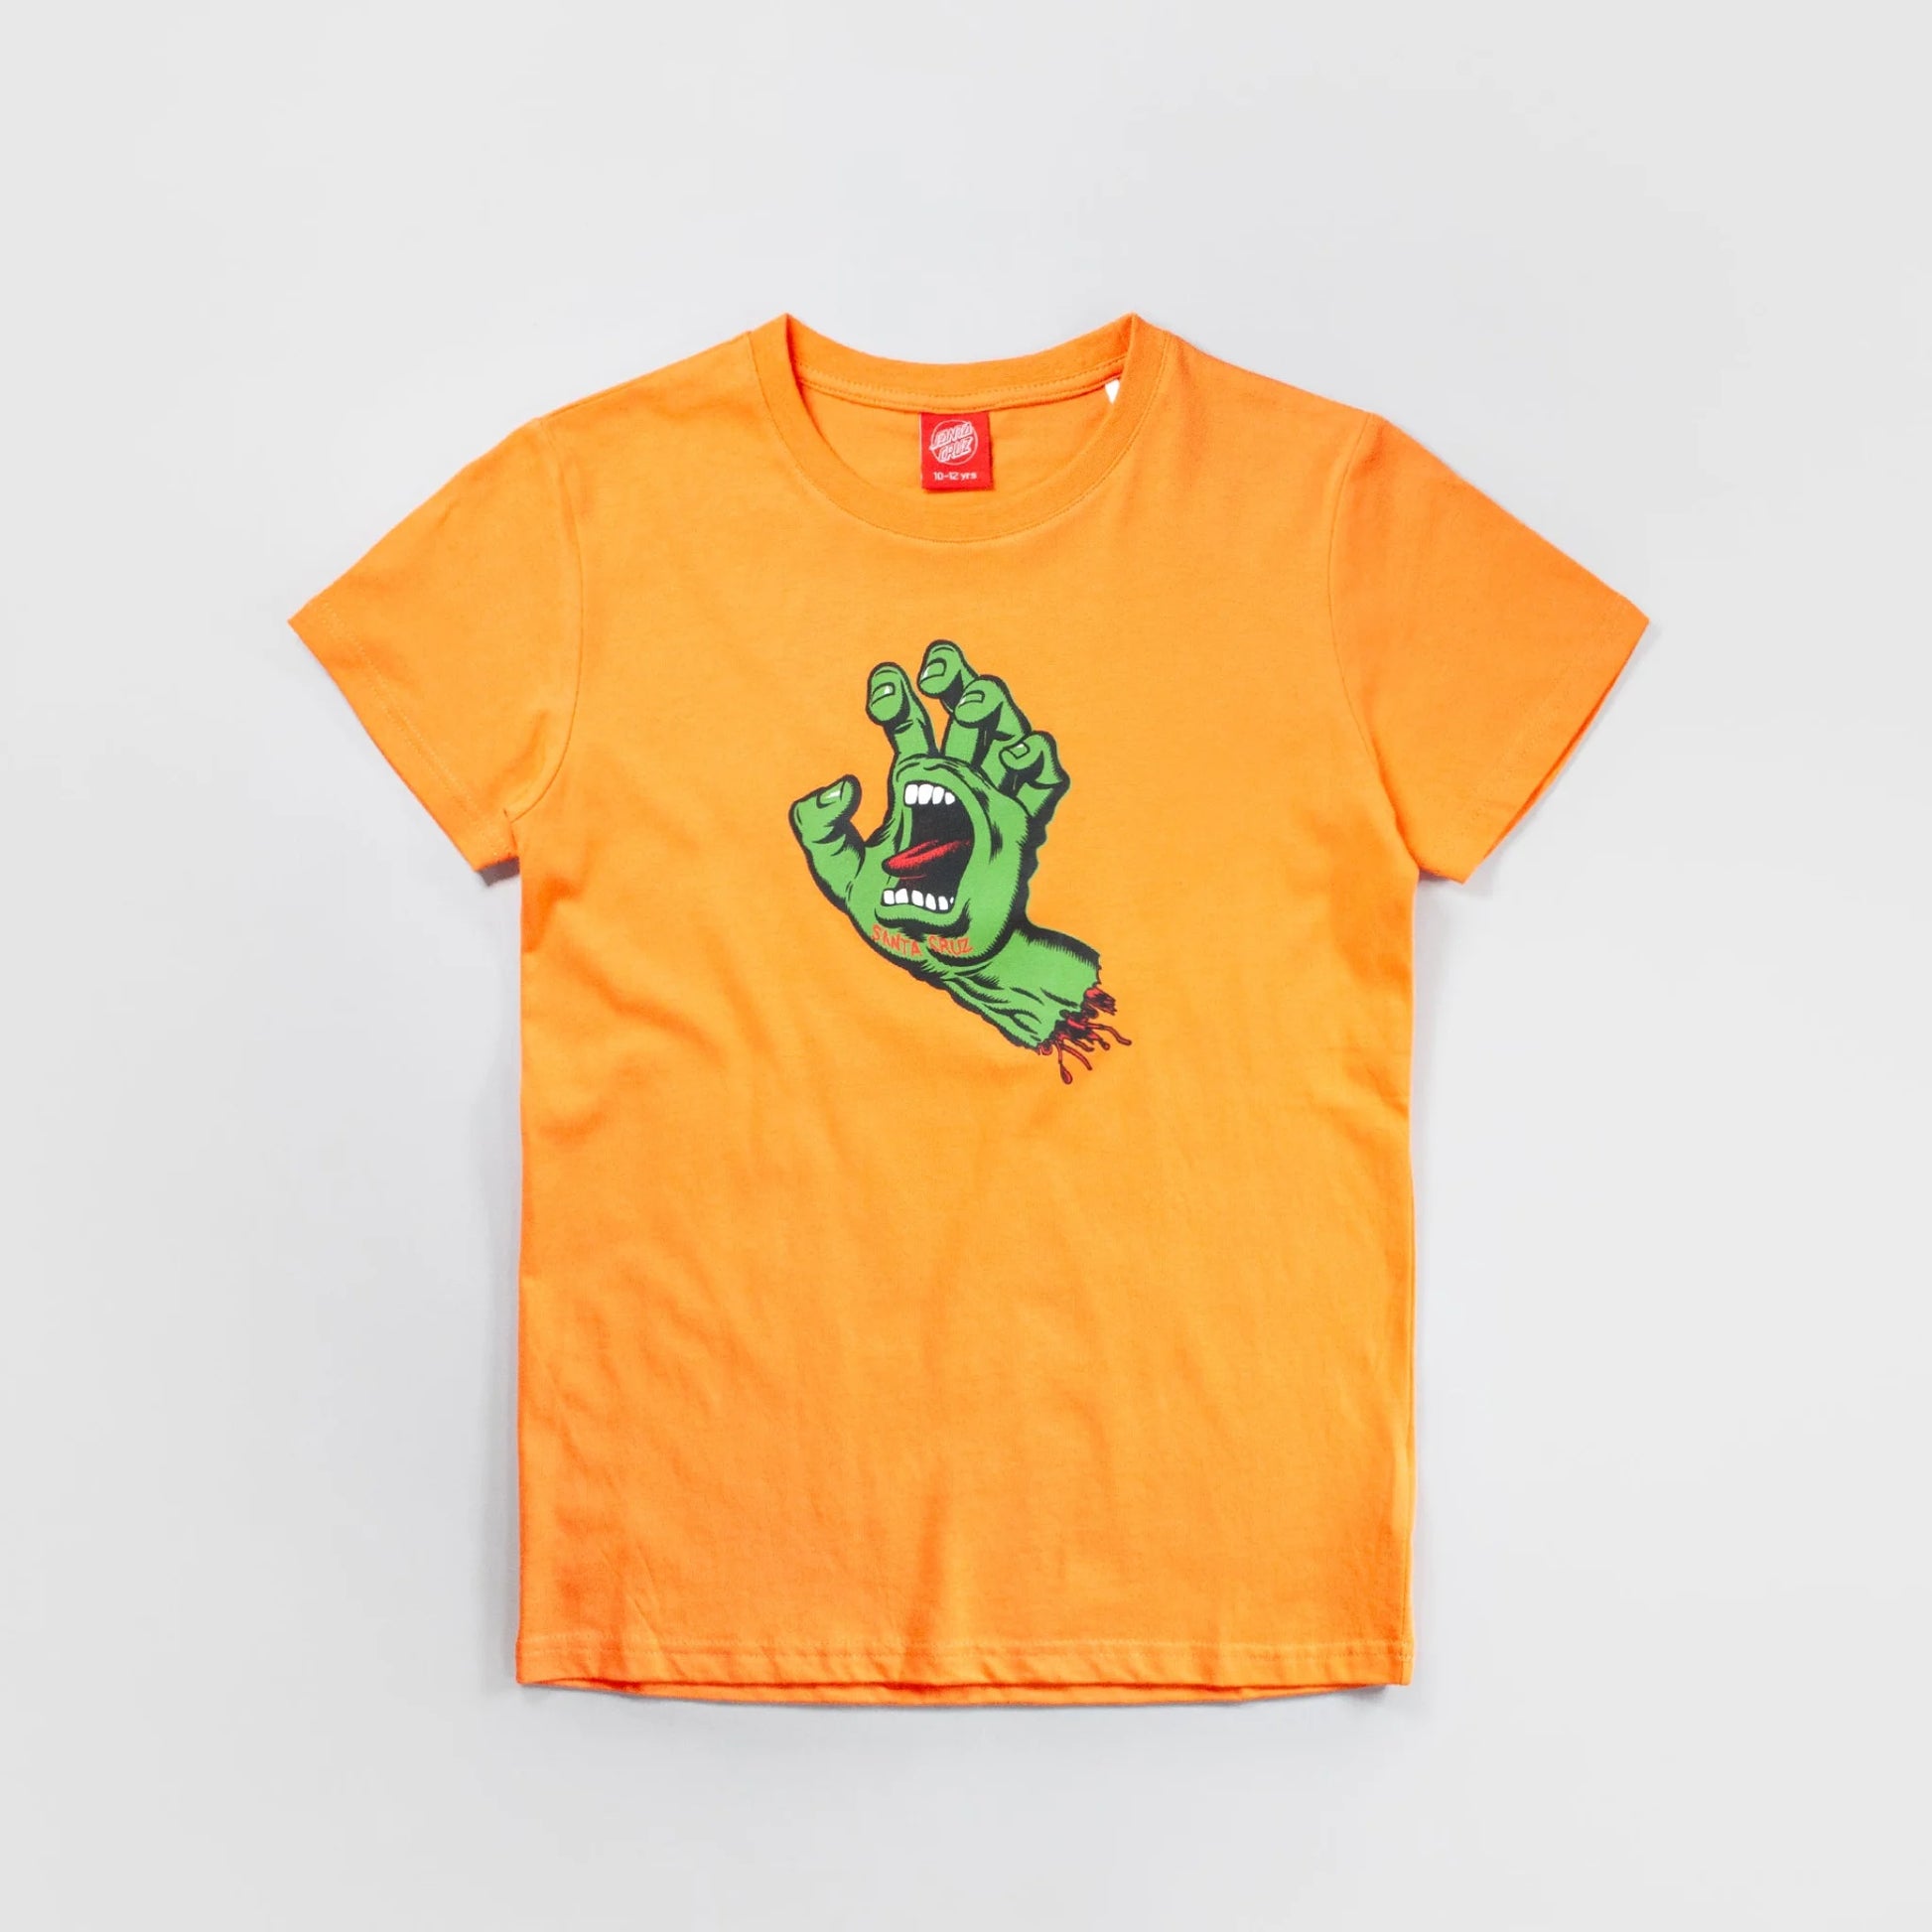 Santa Cruz Youth OS Screaming Hand T Shirt - Apricot - Prime Delux Store